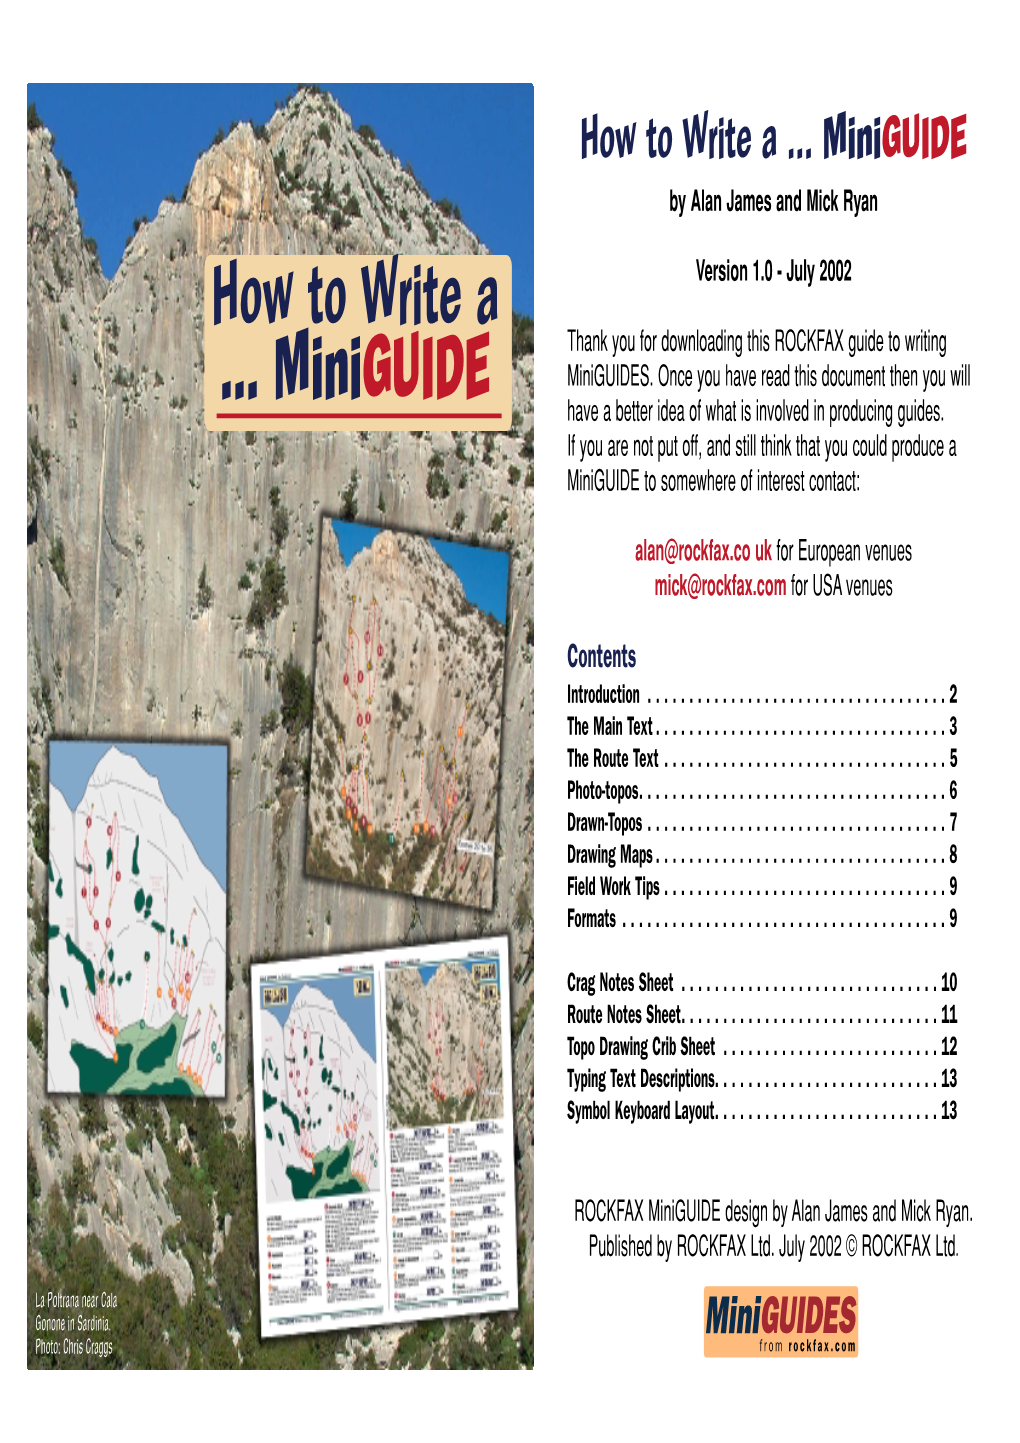 Miniguide by Alan James and Mick Ryan